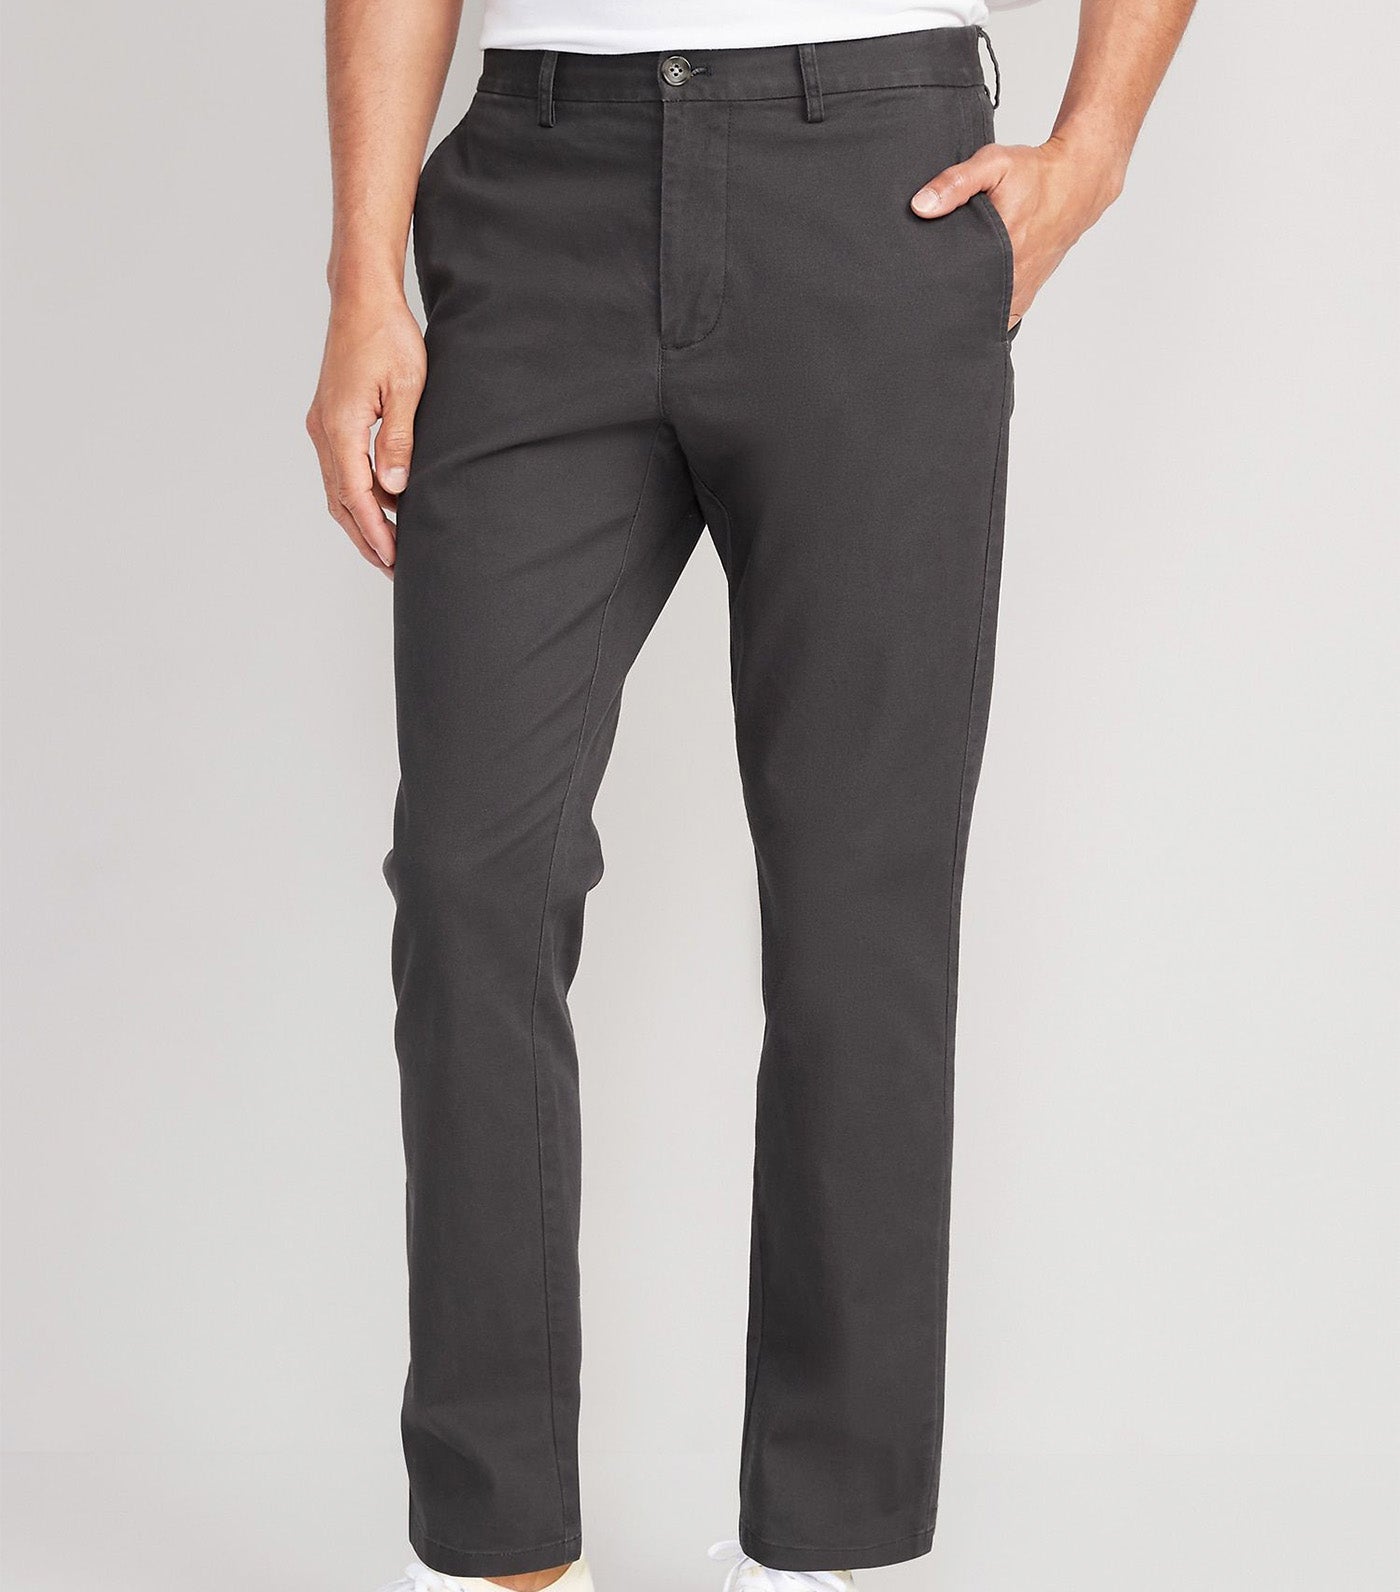 Slim Built-In Flex Rotation Chino Pants for Men Panther